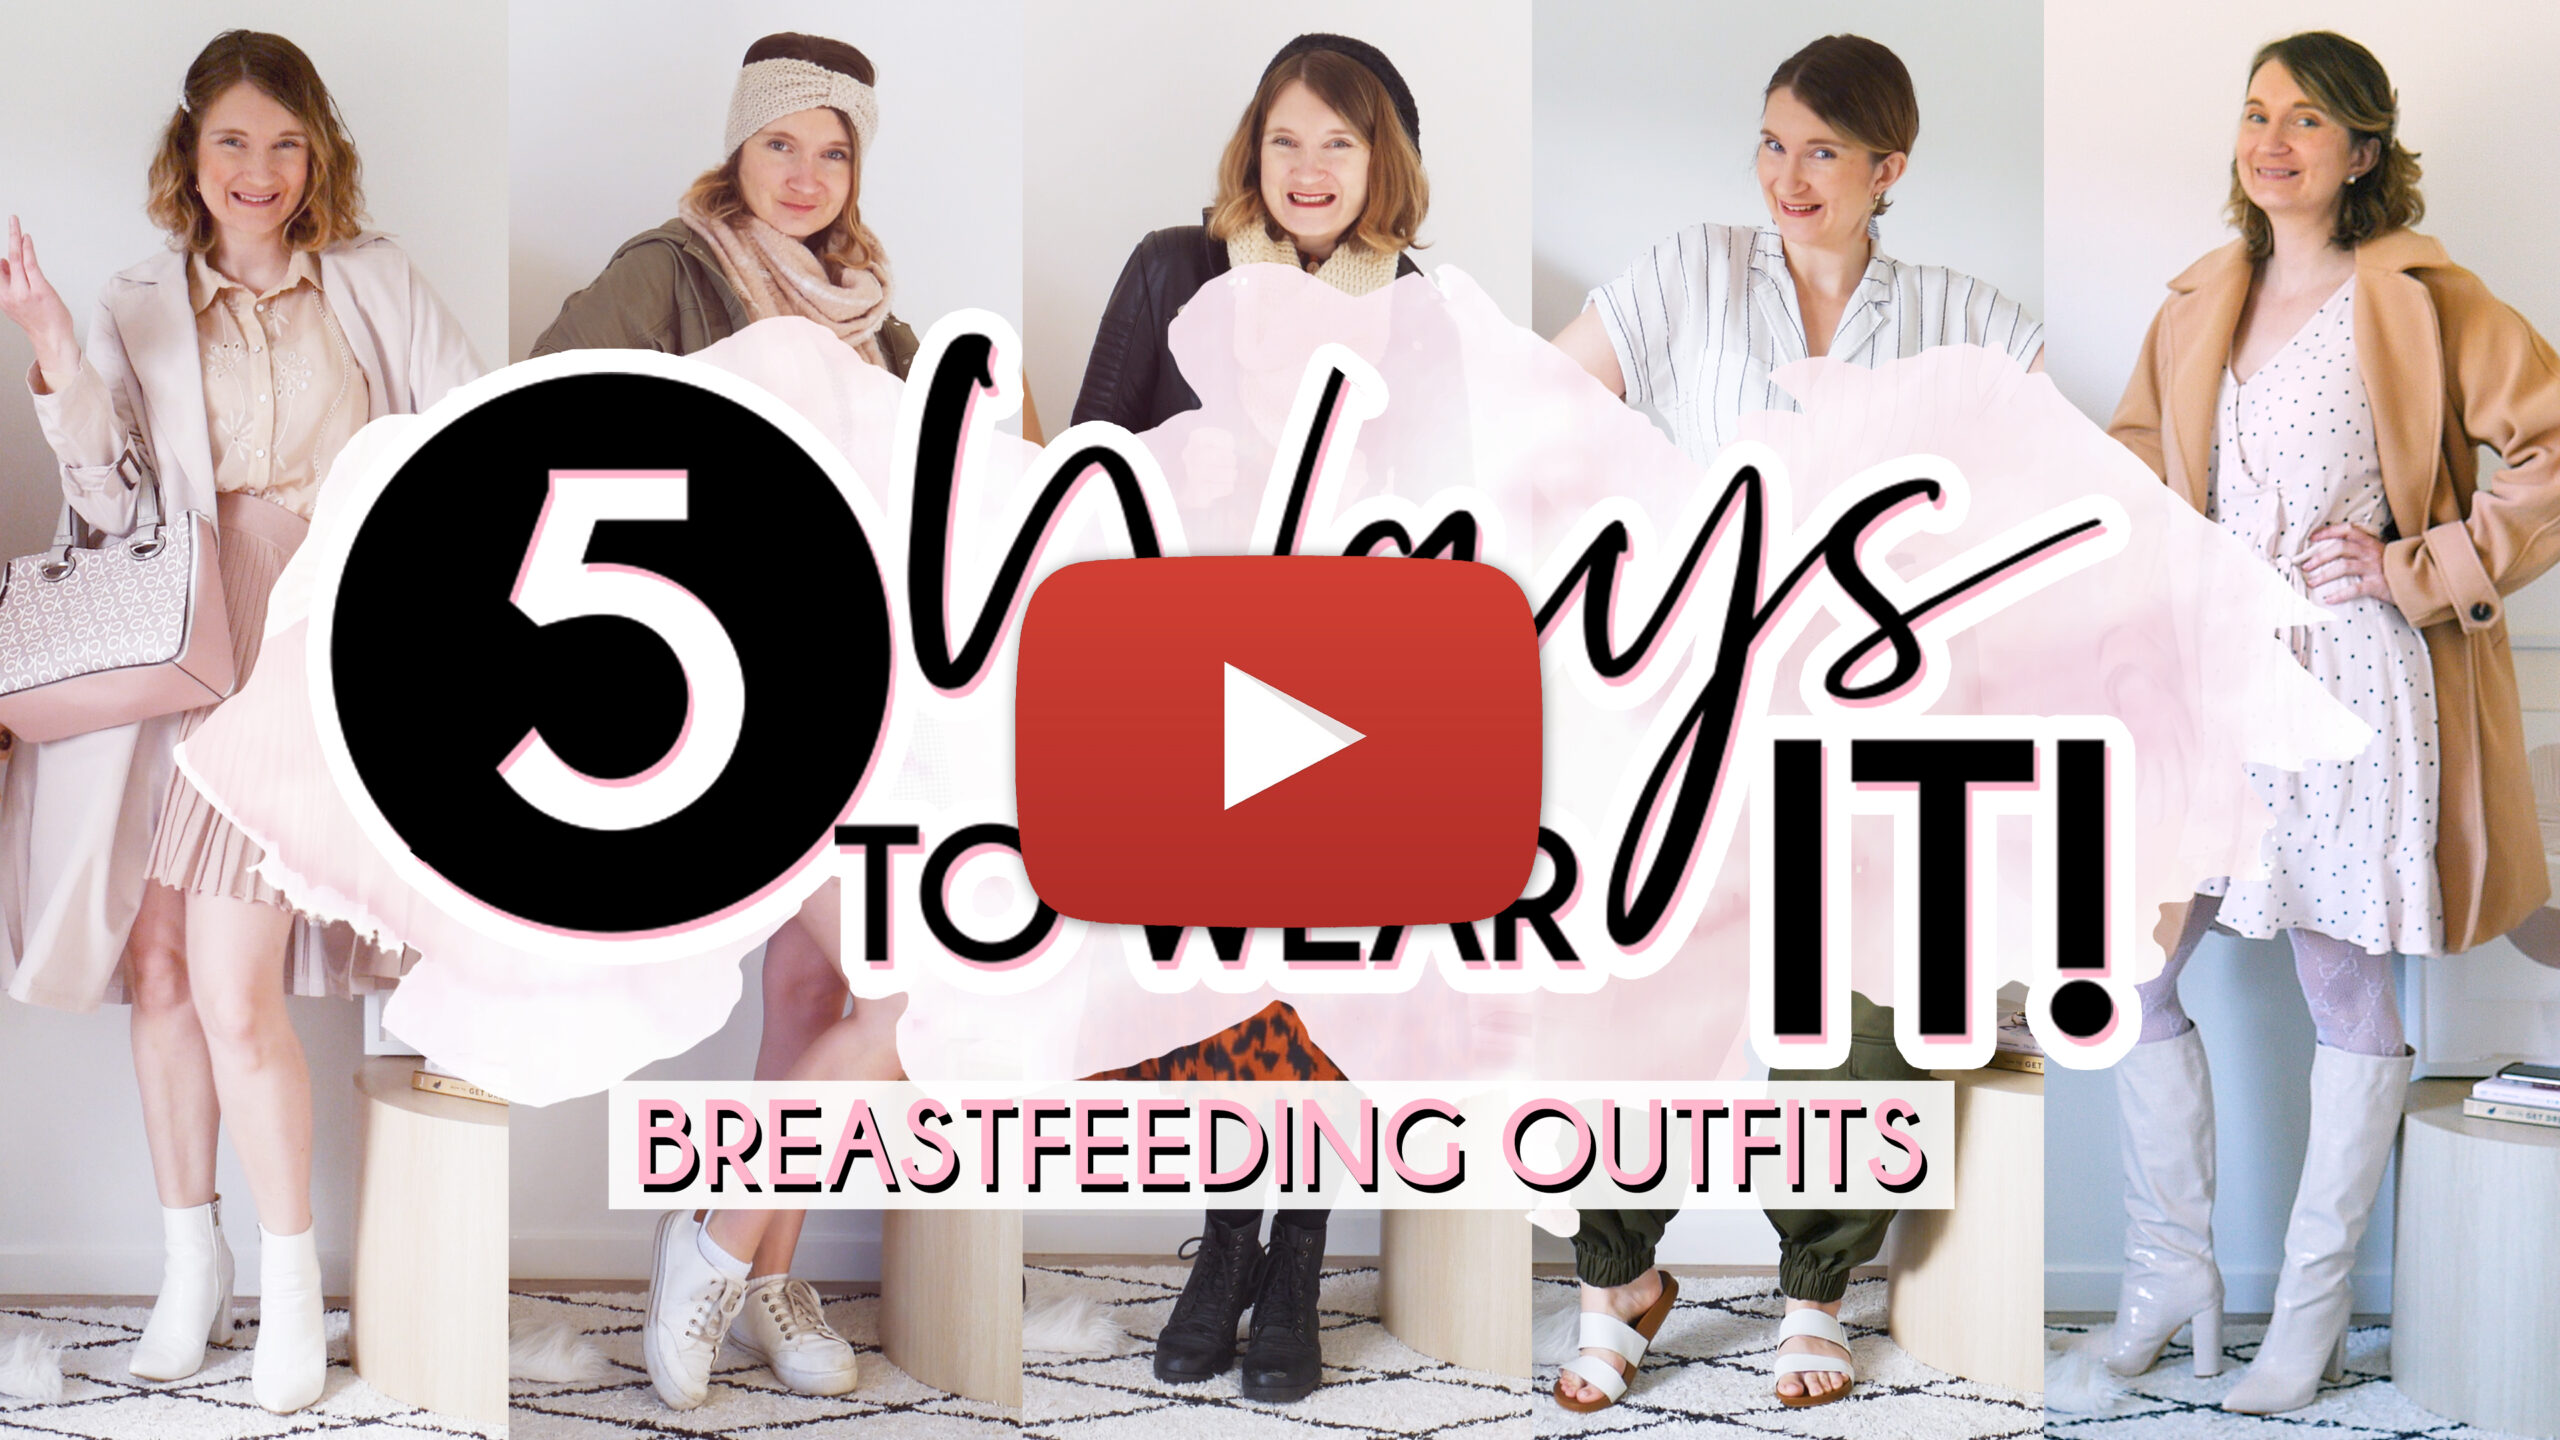 5 Ways to Wear (Breastfeeding Outfits) Youtube Thumbnail Play Button